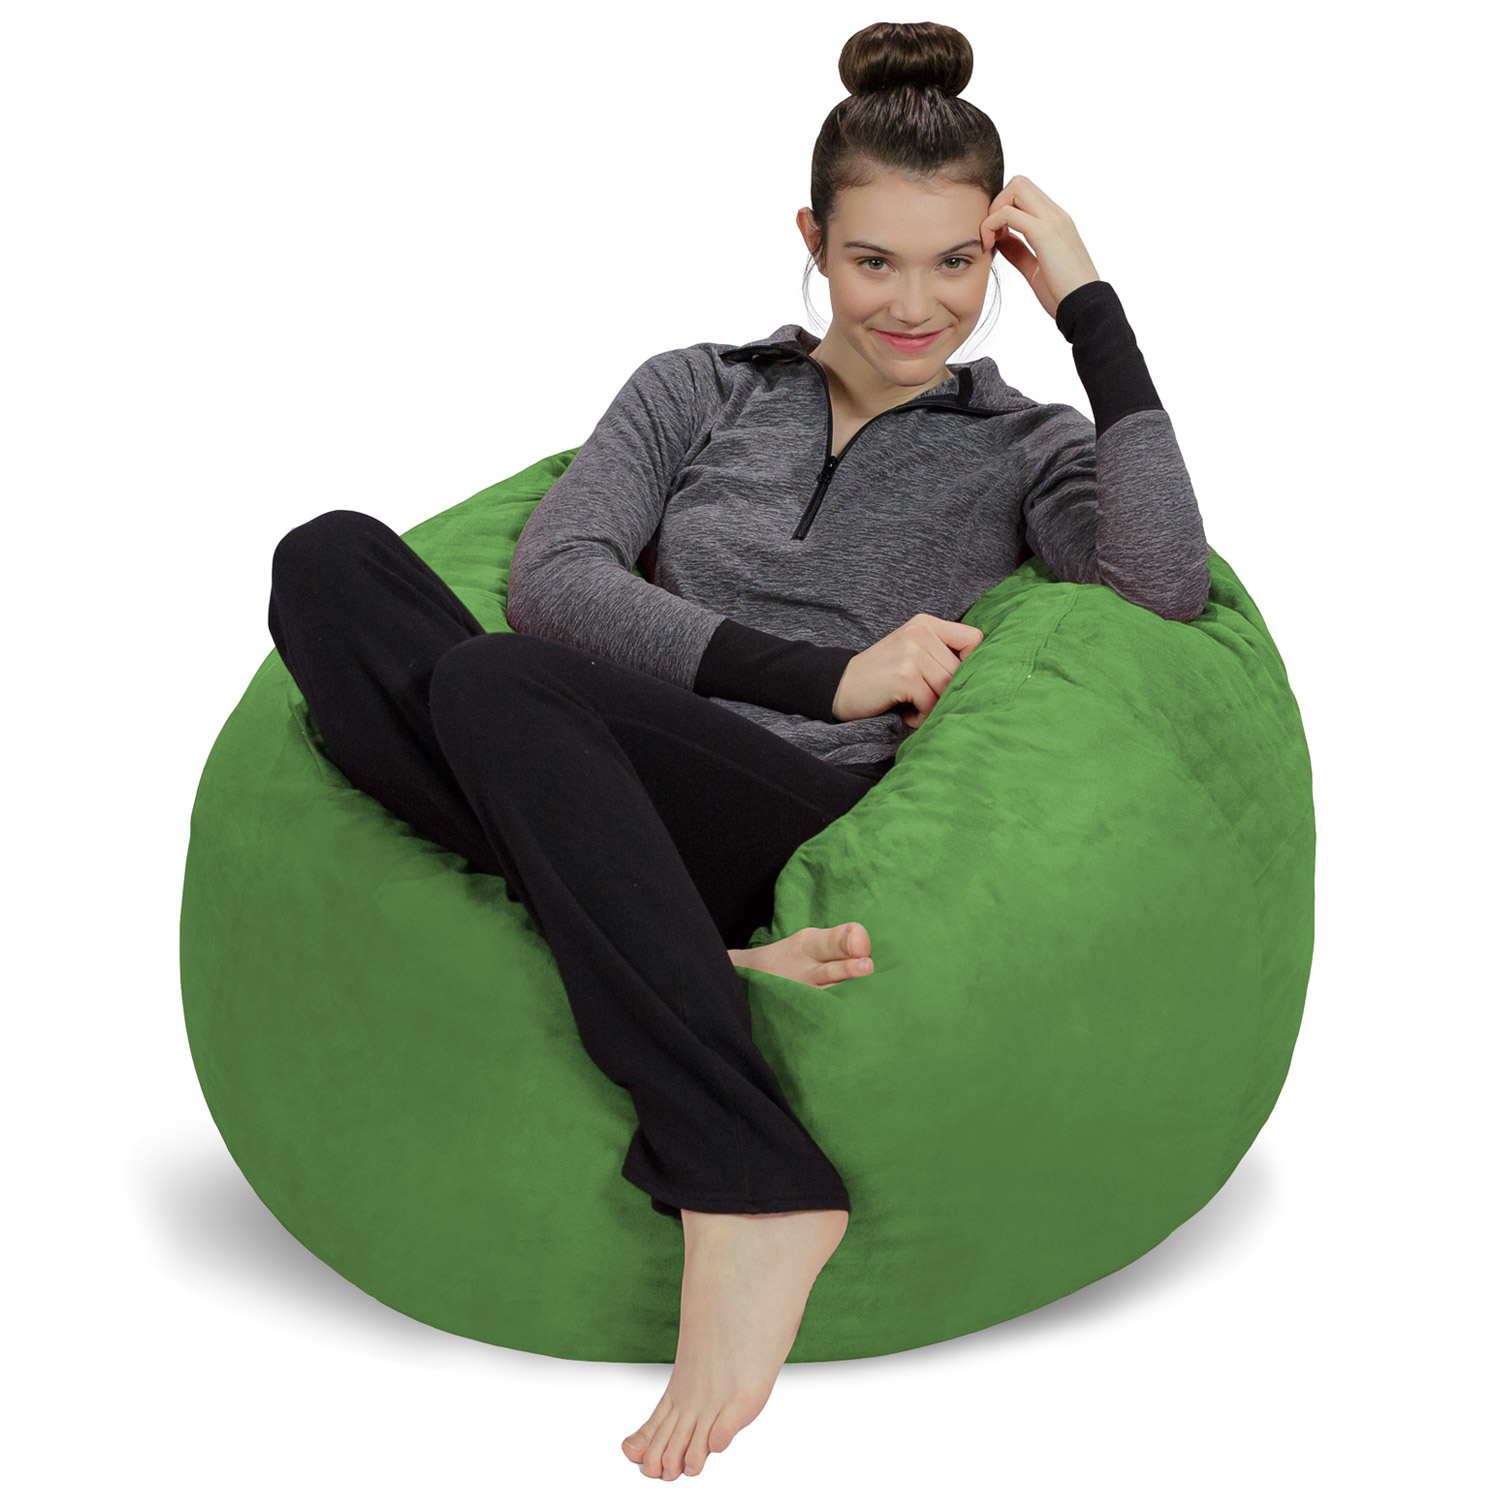 Sofa Sack Bean Bag Chair, Memory Foam Lounger with Microsuede Cover, Kids, 3 ft, Lime - image 1 of 5